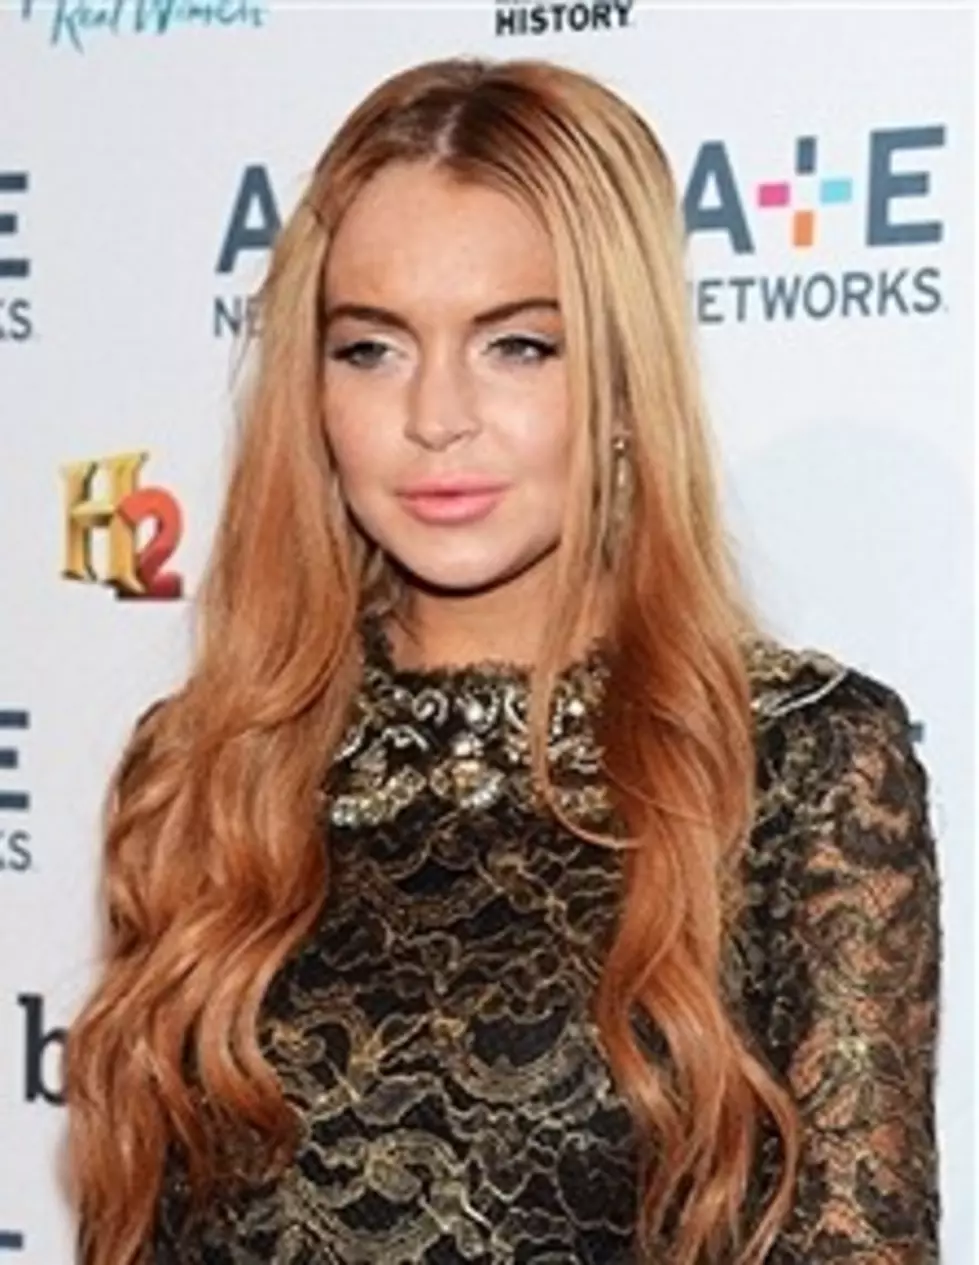 Lindsay Lohan Crashes Her Car And Is Briefly Hospitalized